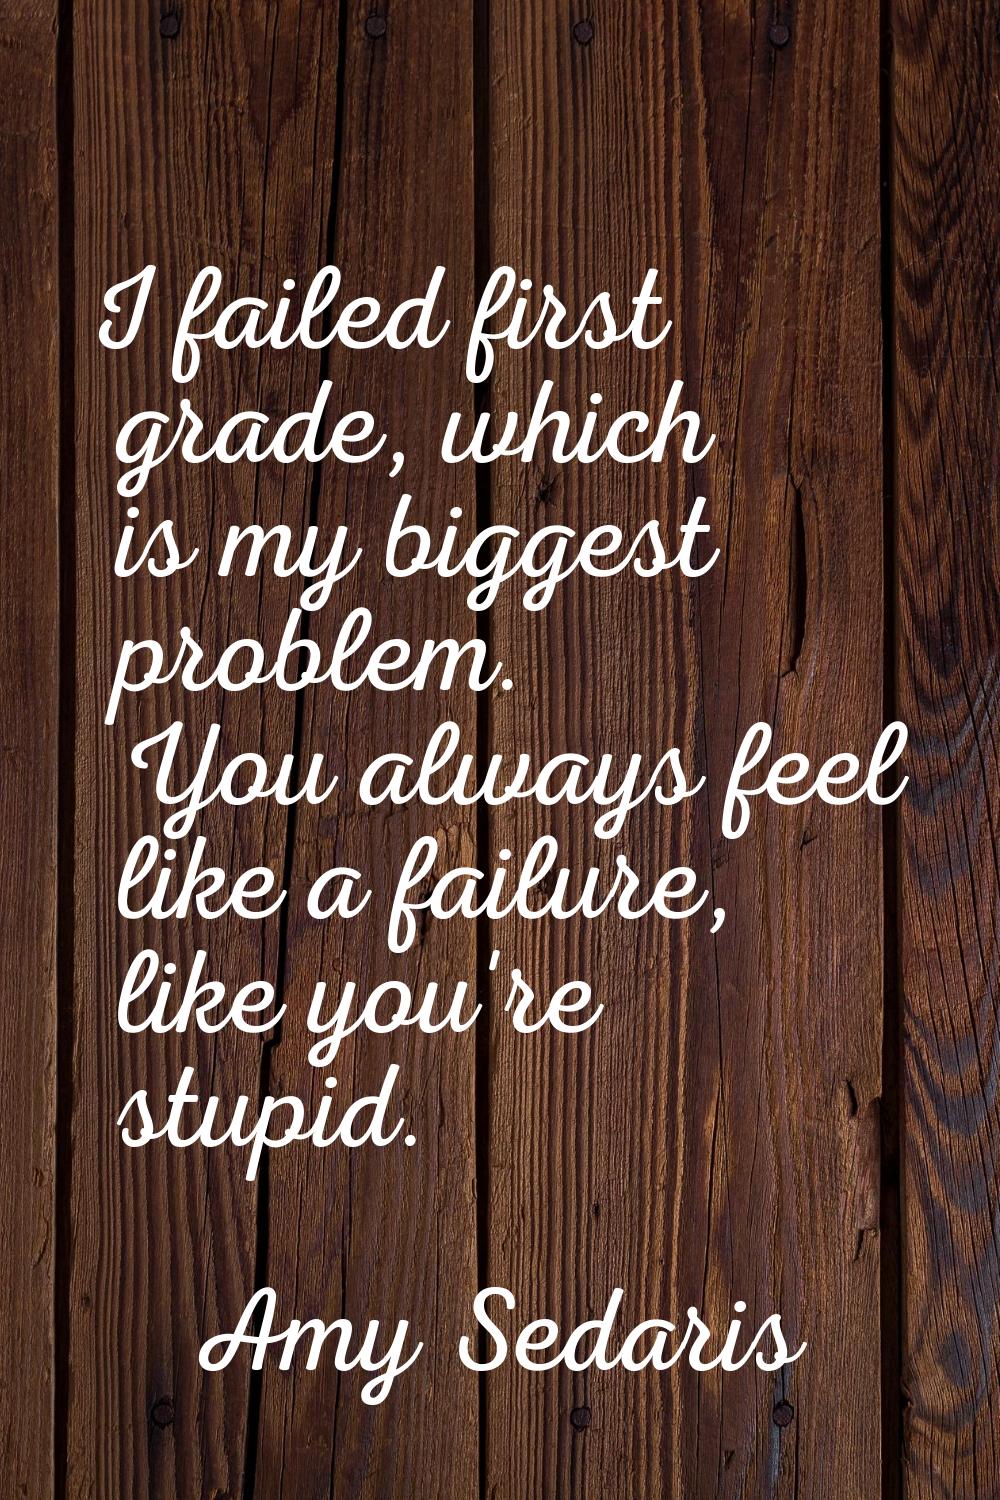 I failed first grade, which is my biggest problem. You always feel like a failure, like you're stup